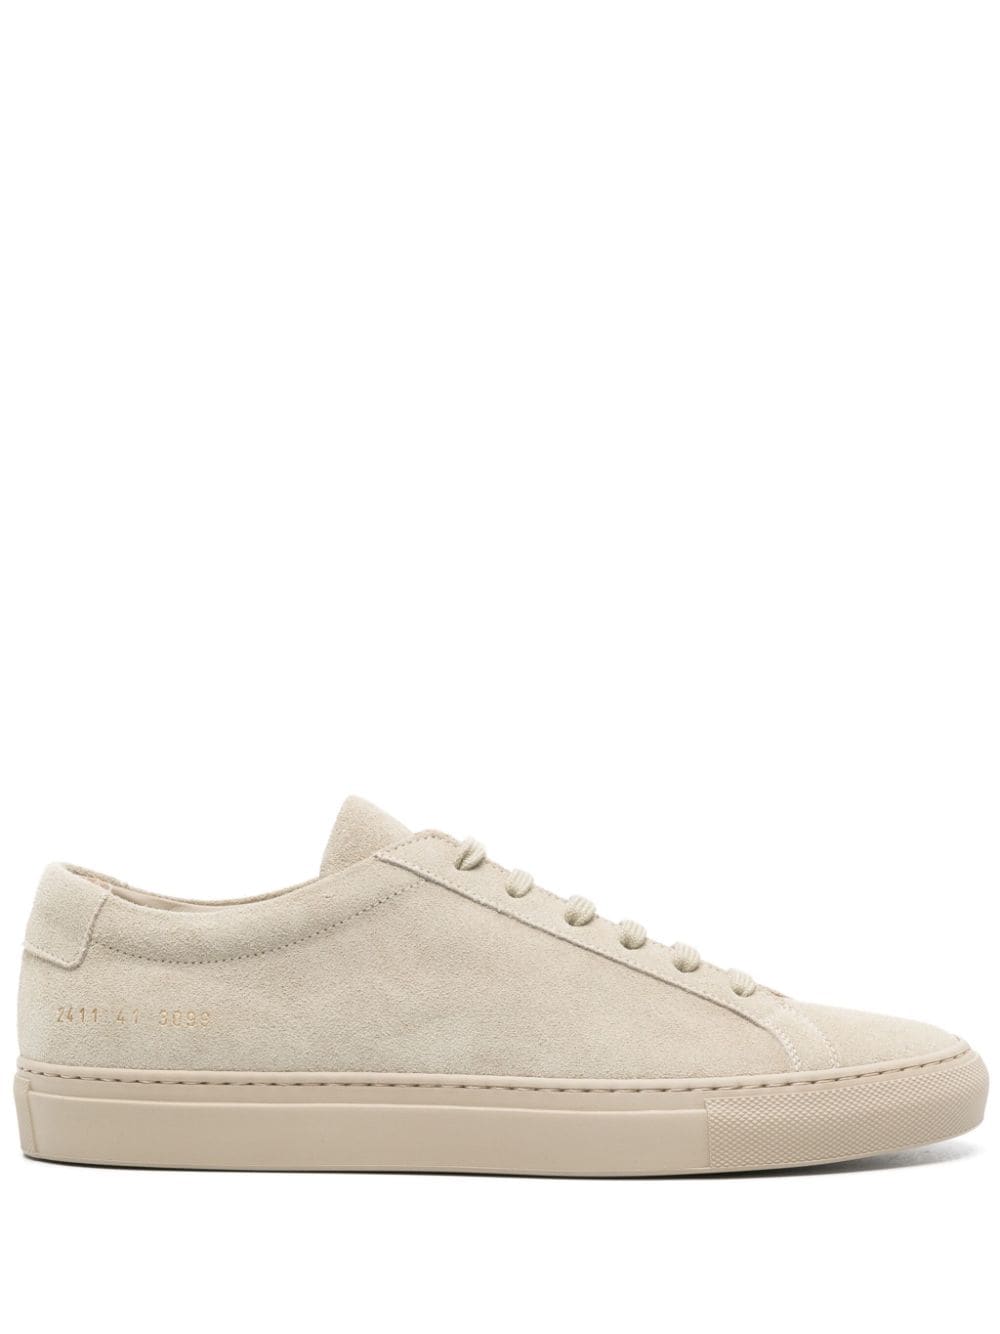 Common Projects Achilles suede sneakers - Green von Common Projects